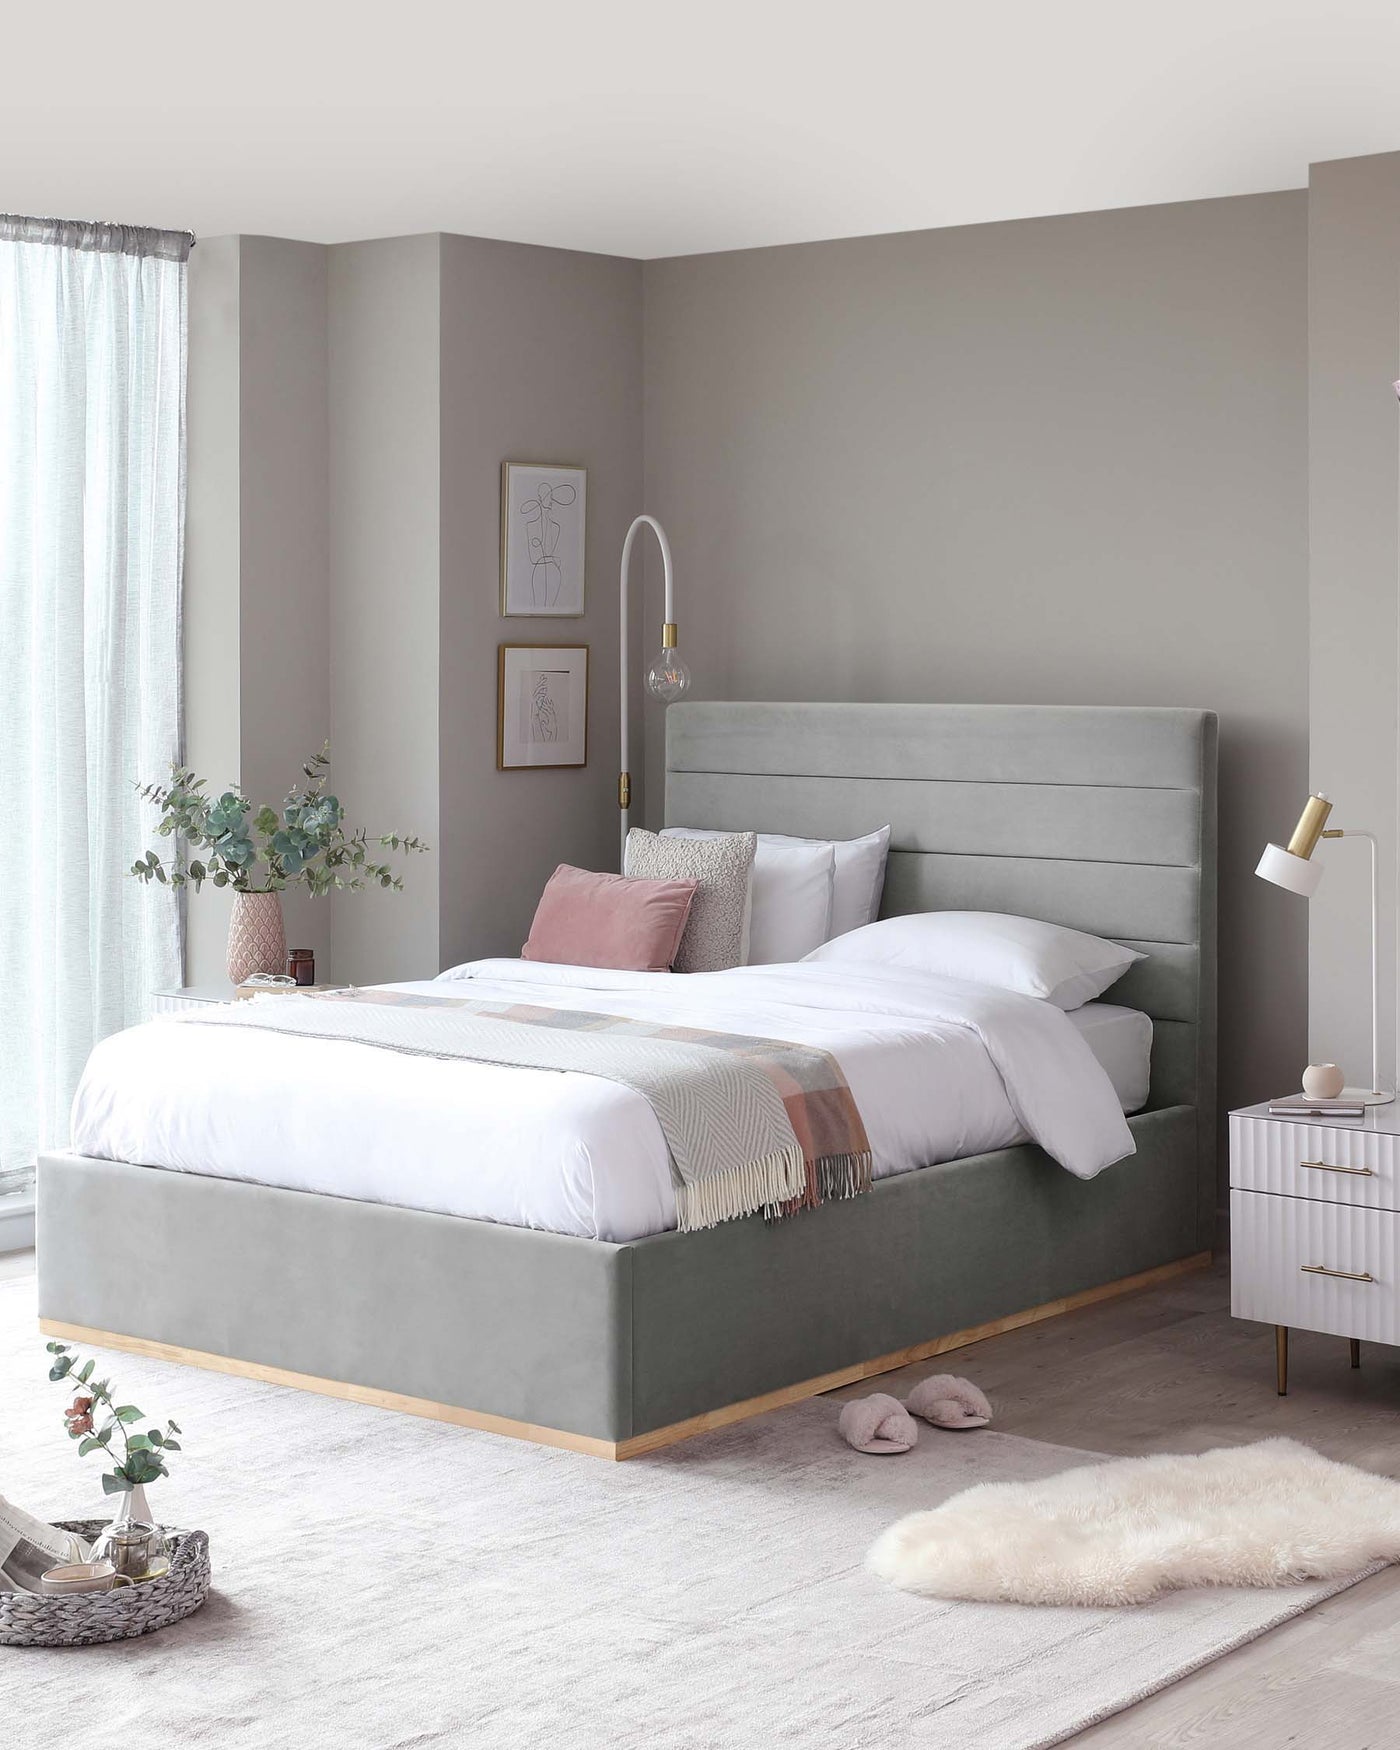 Modern bedroom furniture set featuring a king-sized bed with a tufted, upholstered headboard in a soft grey fabric and a matching platform base with wooden accents. A stylish white bedside table with gold accents and slender legs is placed next to the bed.